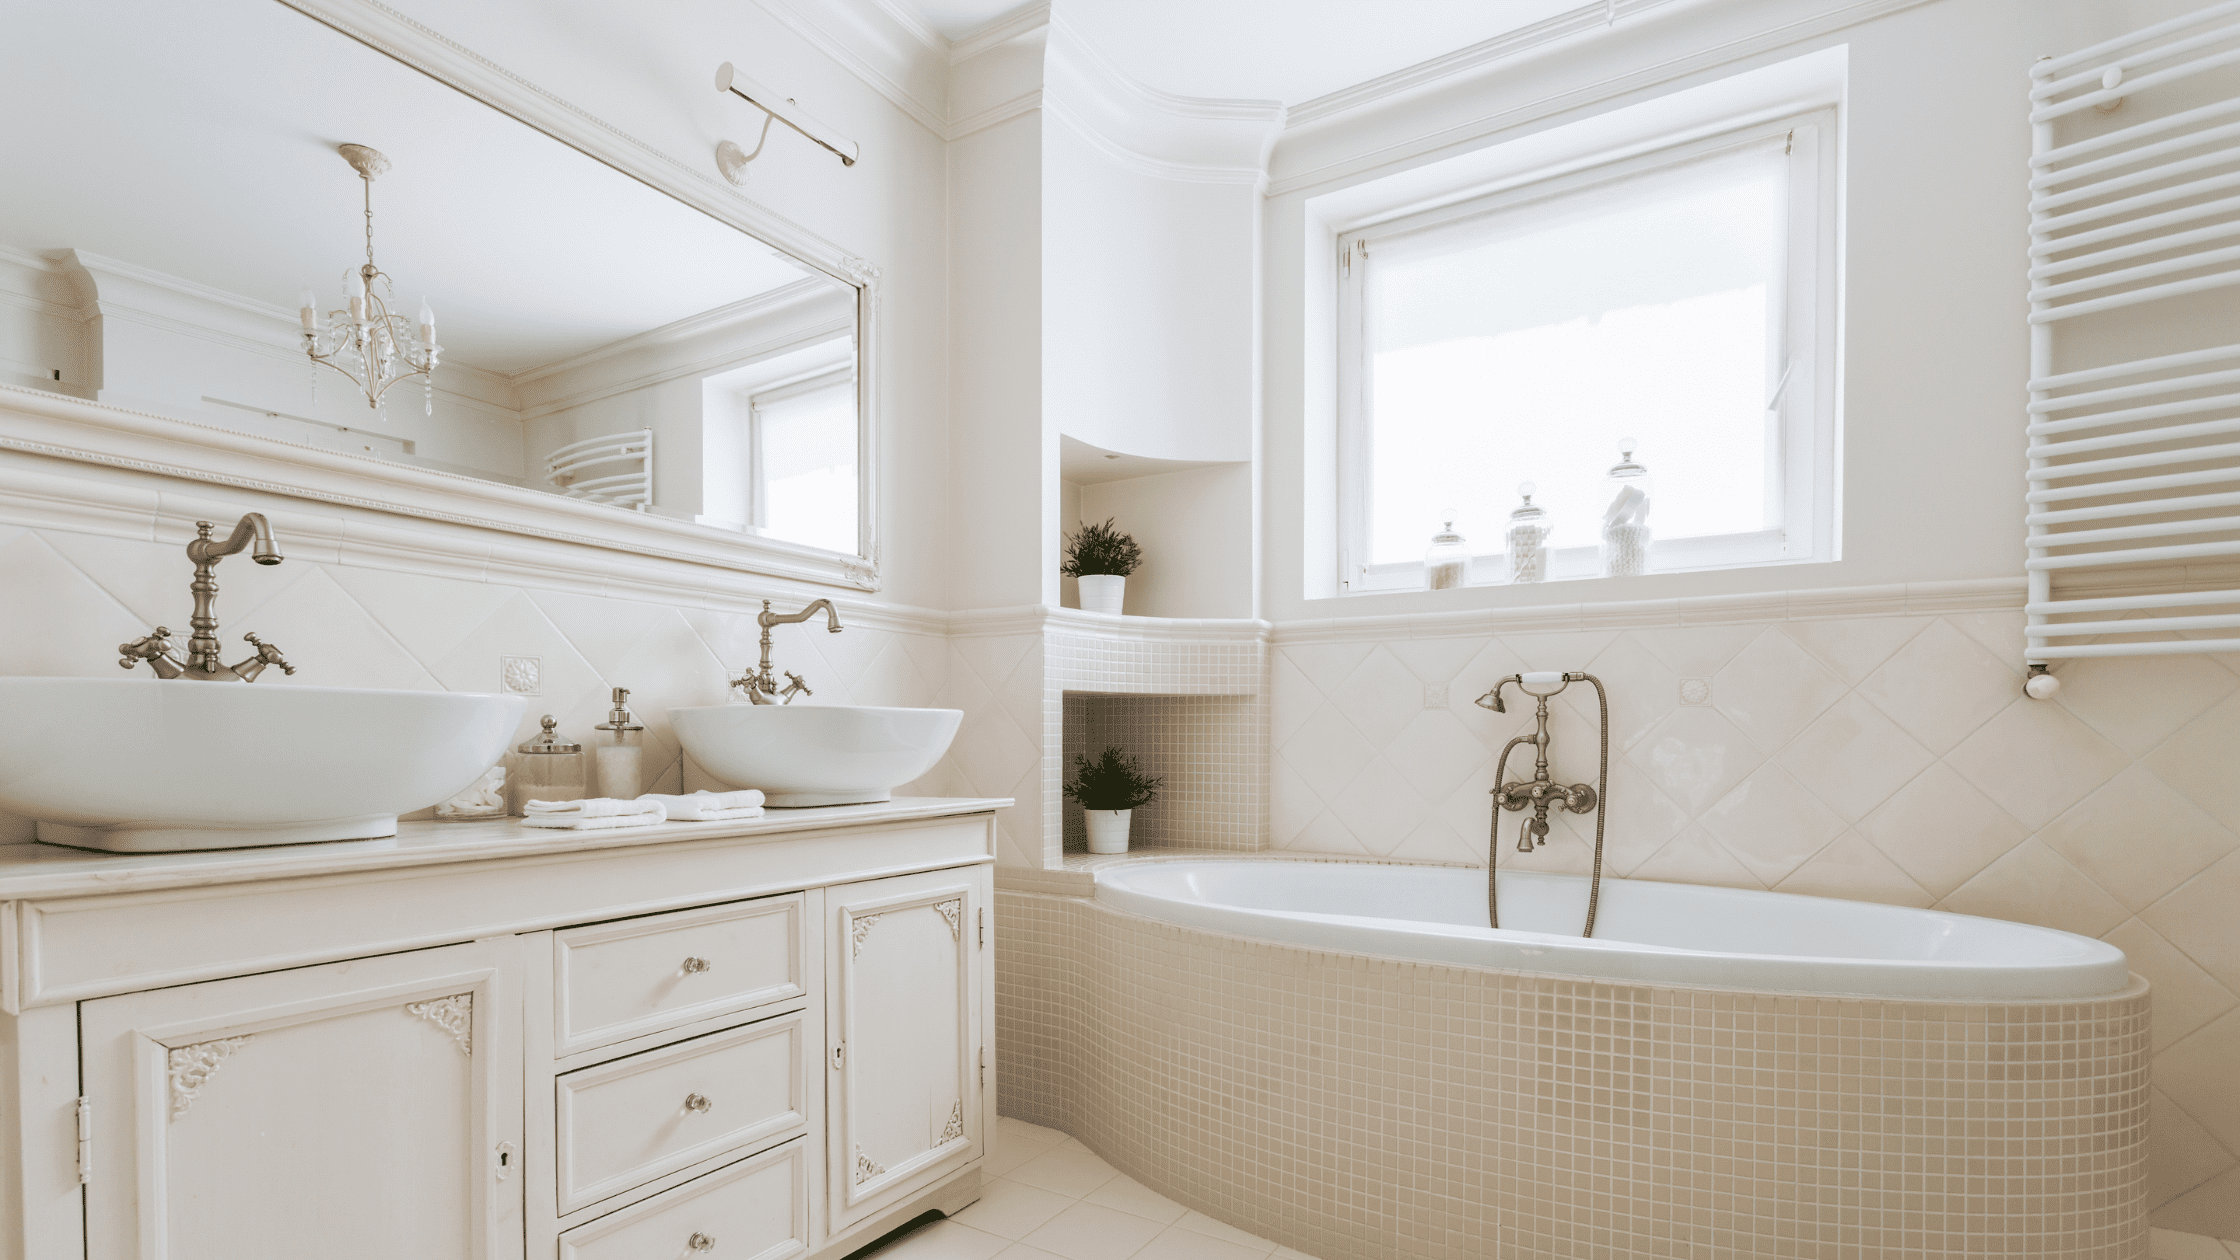 A Guide To The Best Windows For Your Bathroom